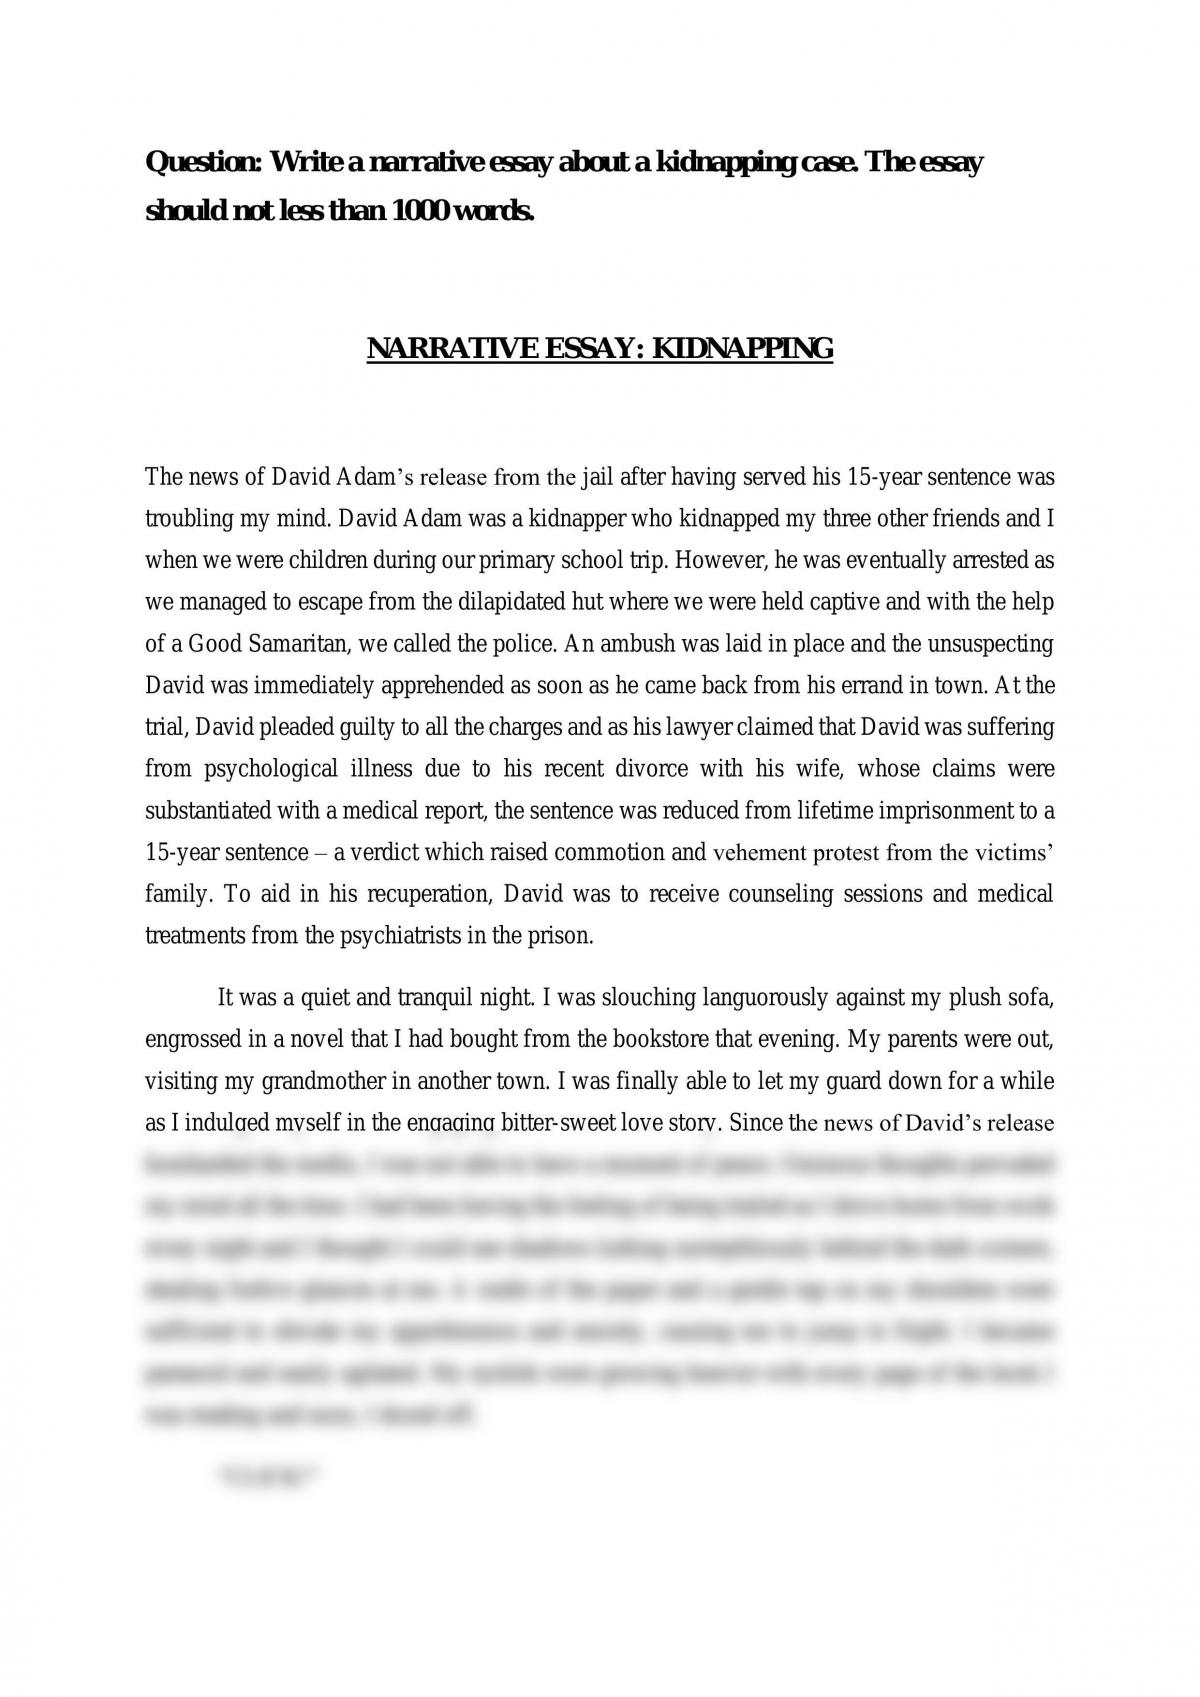 narrative essay about being kidnapped